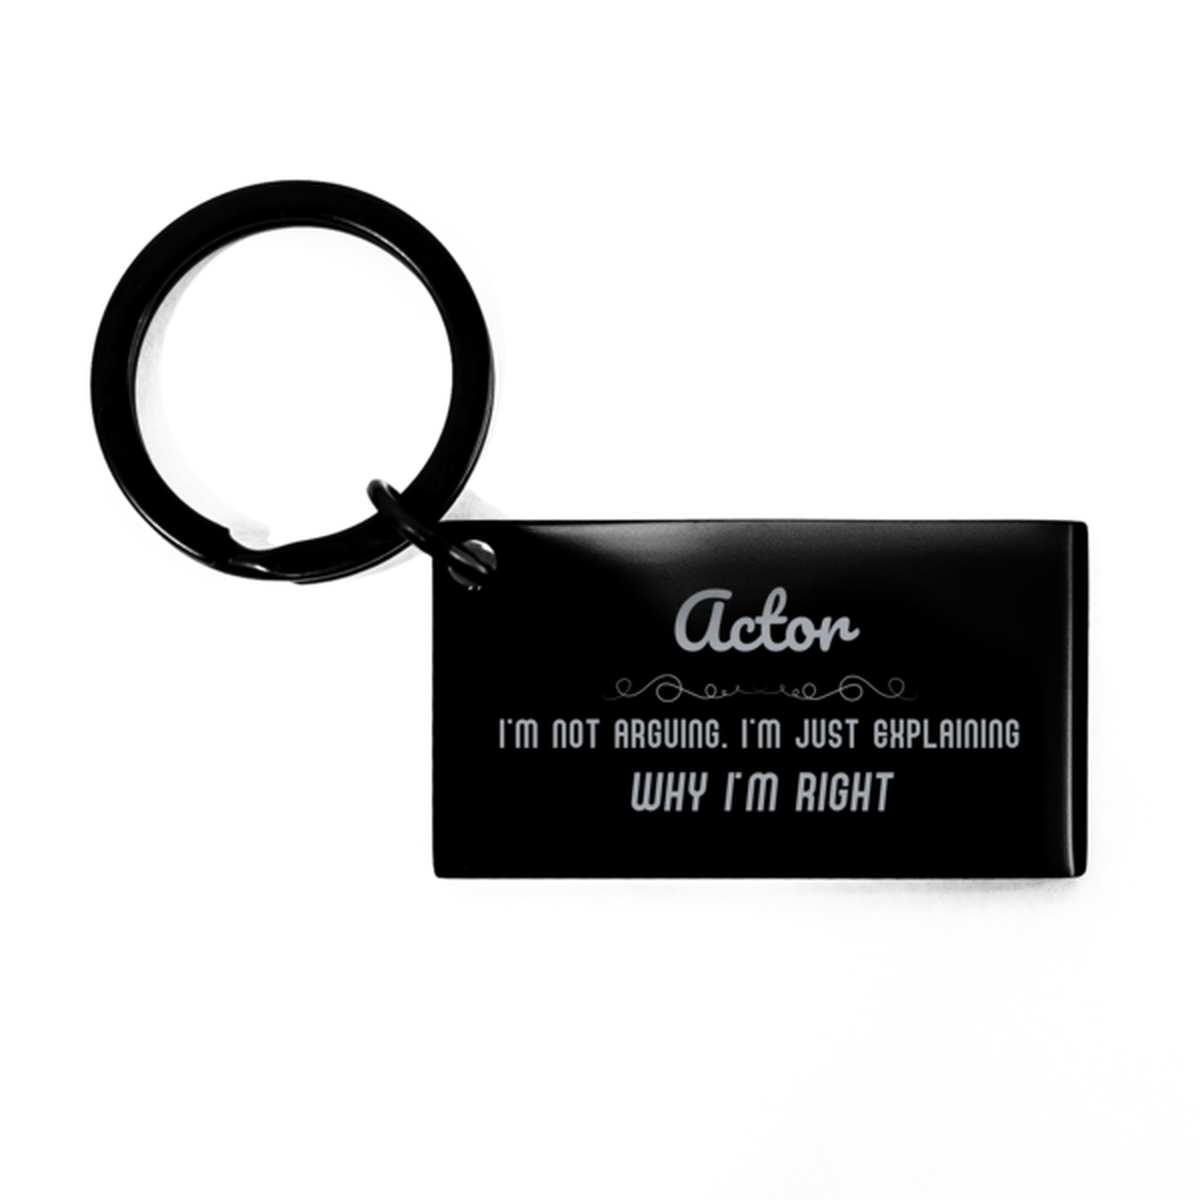 Actor I'm not Arguing. I'm Just Explaining Why I'm RIGHT Keychain, Funny Saying Quote Actor Gifts For Actor Graduation Birthday Christmas Gifts for Men Women Coworker